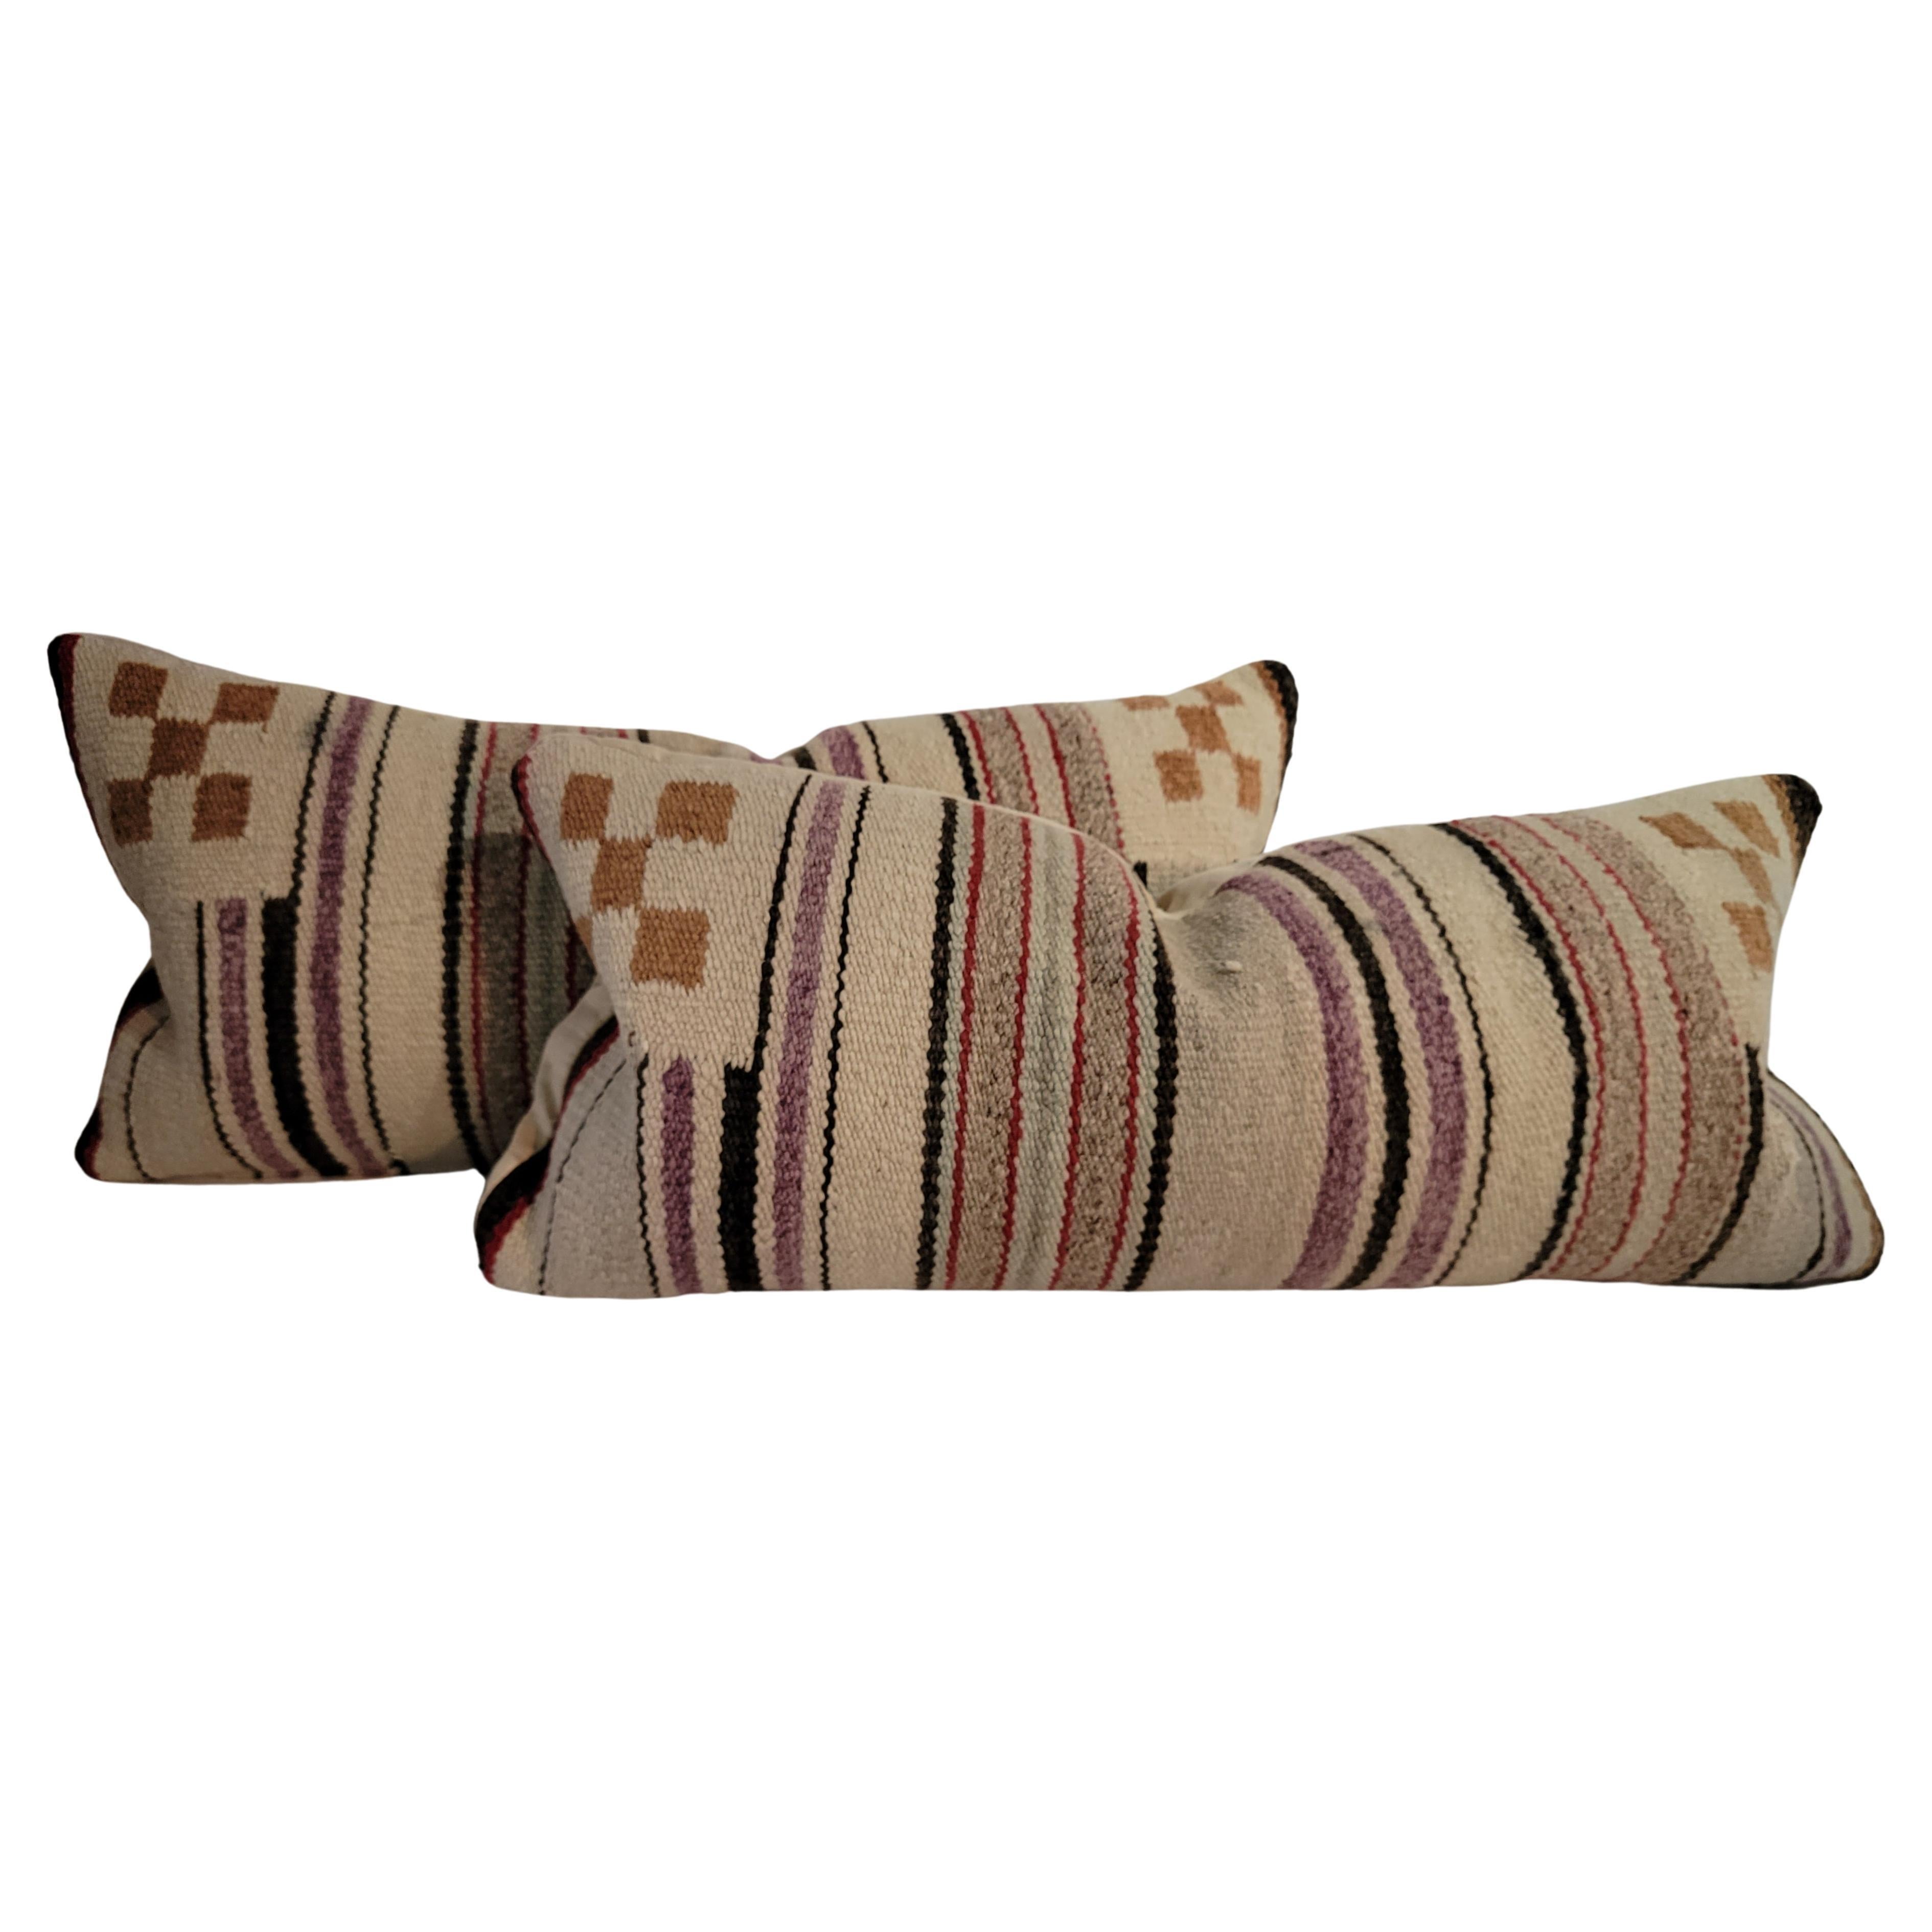 Early Navajo Weaving Saddle Blanket Pillows For Sale